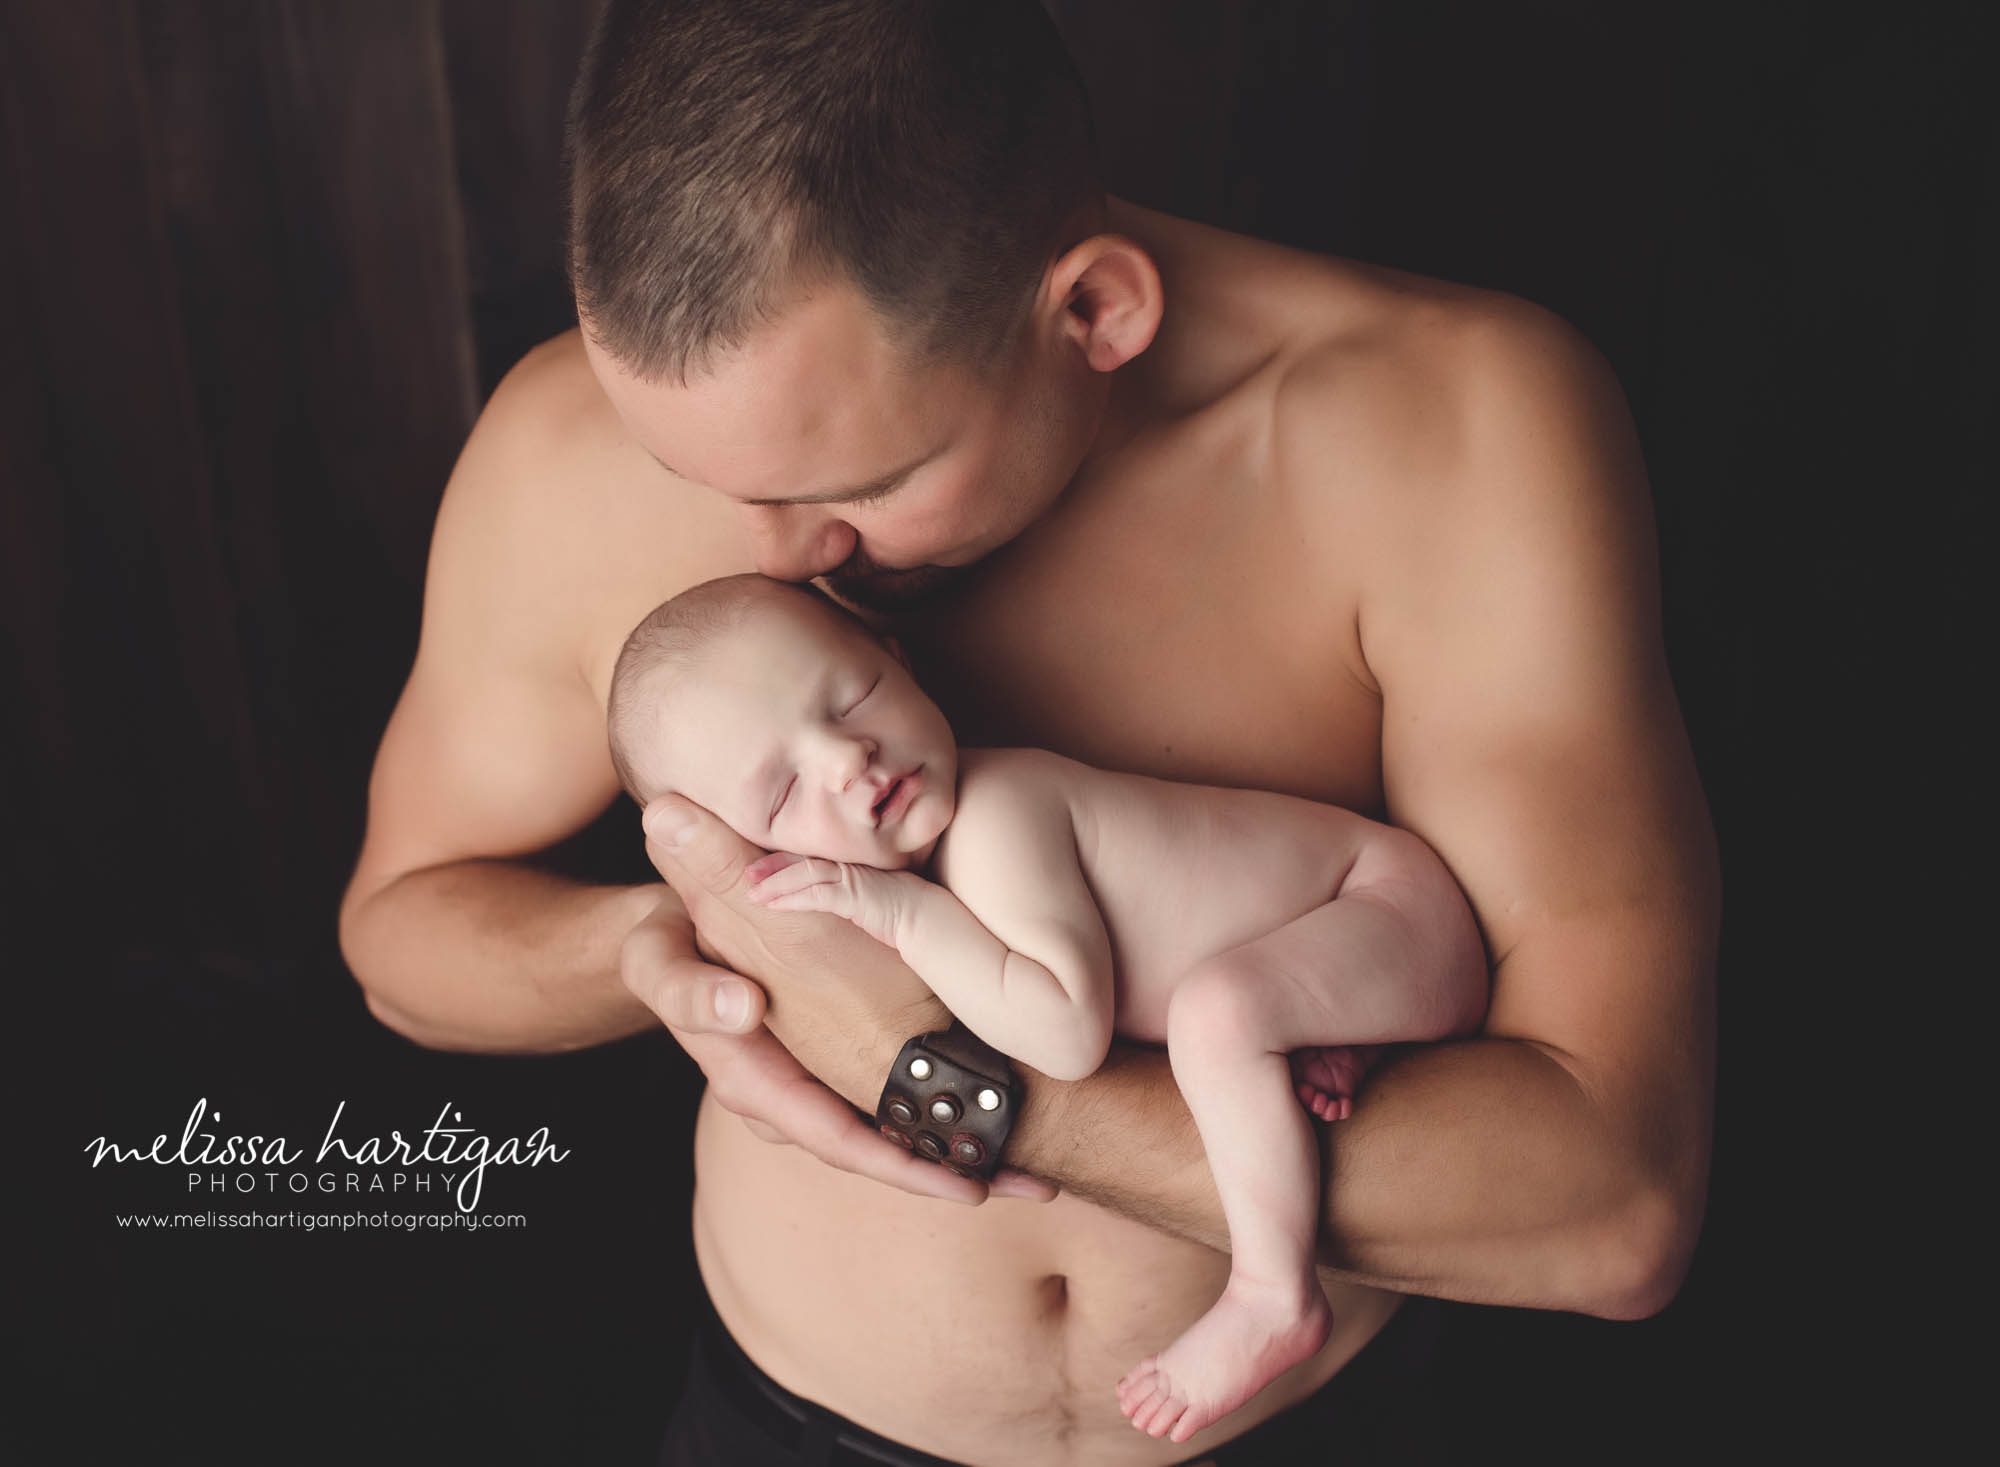 Melissa Hartigan Photography CT Newborn Photographer Stafford baby boy sleeping naked on father's arms with father shirtless and smelling his head